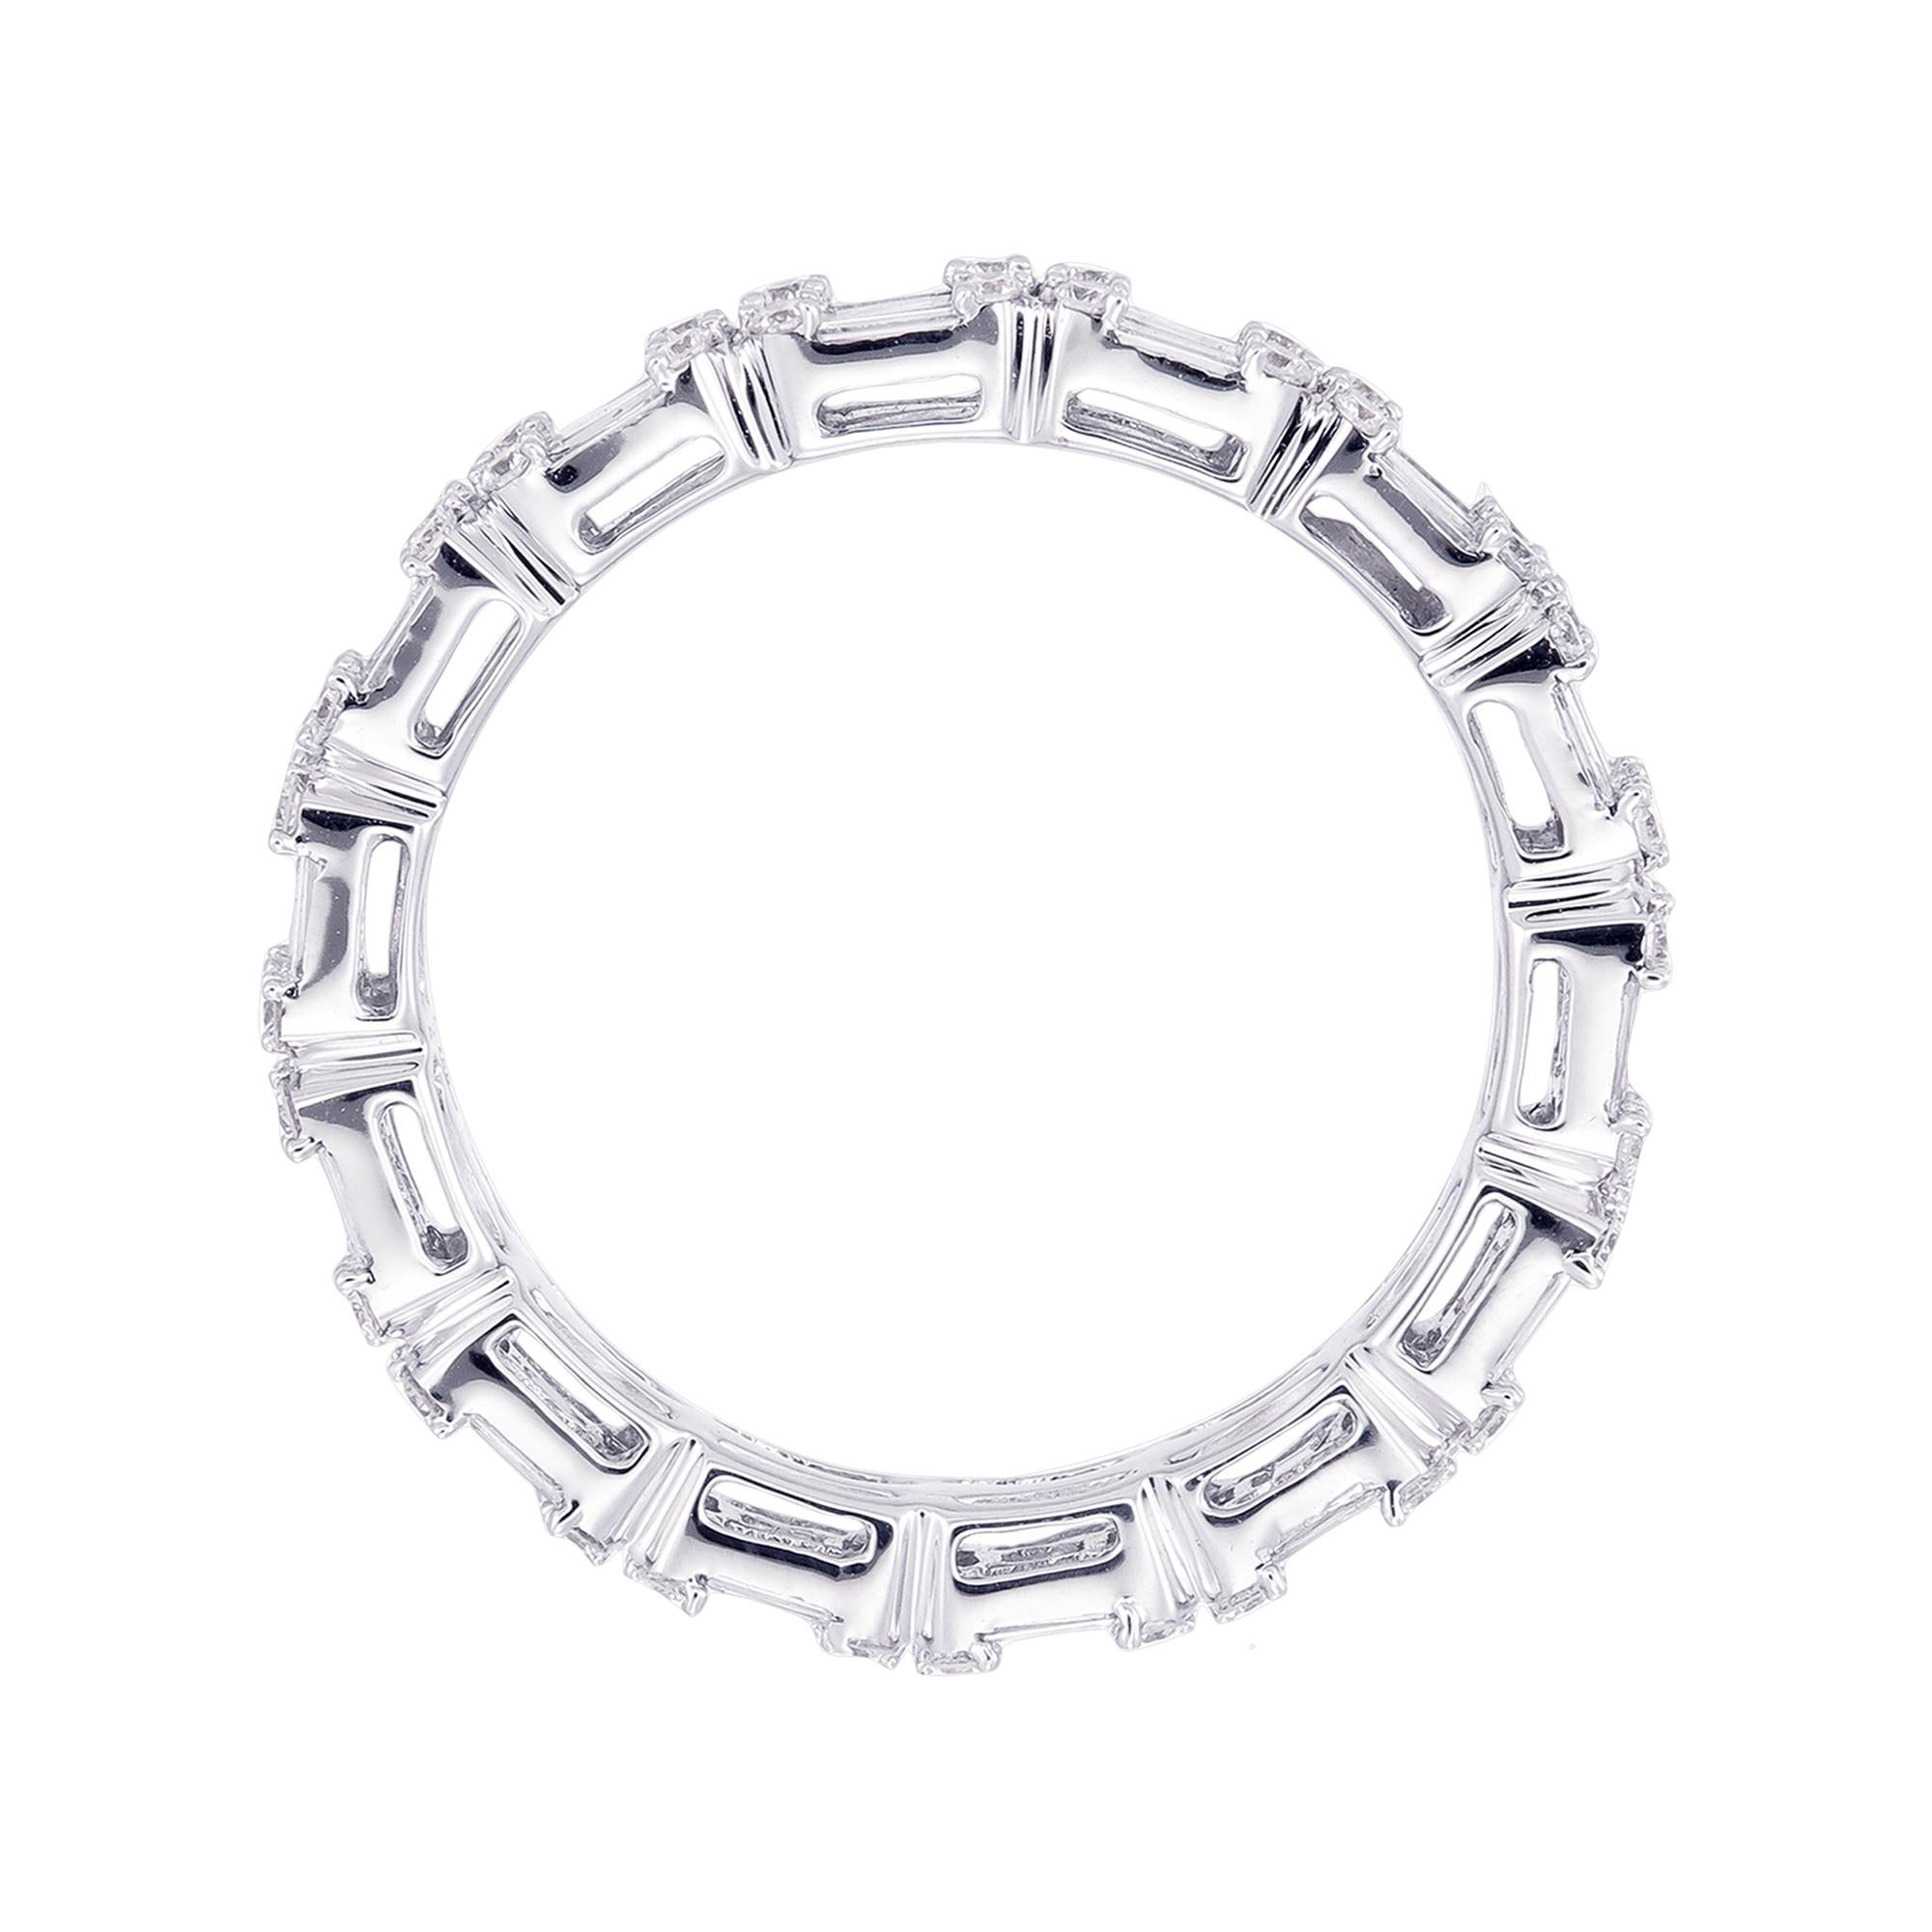 This show-stopping diamond band is carefully crafted with round brilliant and baguette diamonds to create the look of a larger emerald-cut diamond eternity band. Each section appears to contain an Baguette cut diamond in the center.  Closer